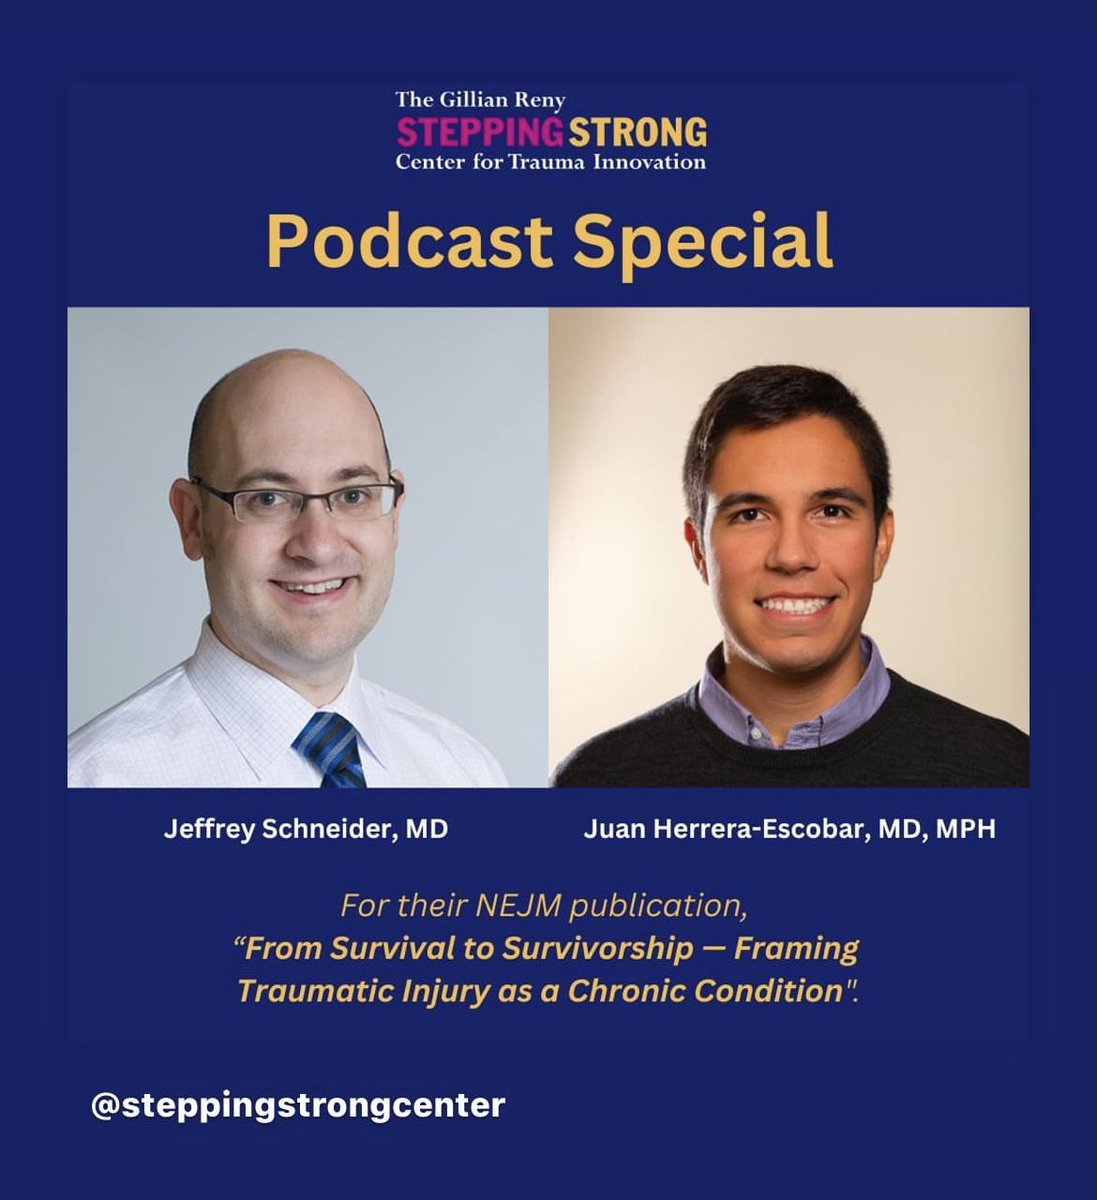 🎧 Listen to the 2-part series special podcast of “Finding Strength: The Spaulding Rehabilitation Podcast” inspired by the @NEJM perspective “From Survival to Survivorship - Framing Traumatic Injury as a Chronic Condition” open.spotify.com/episode/0UFaWo…